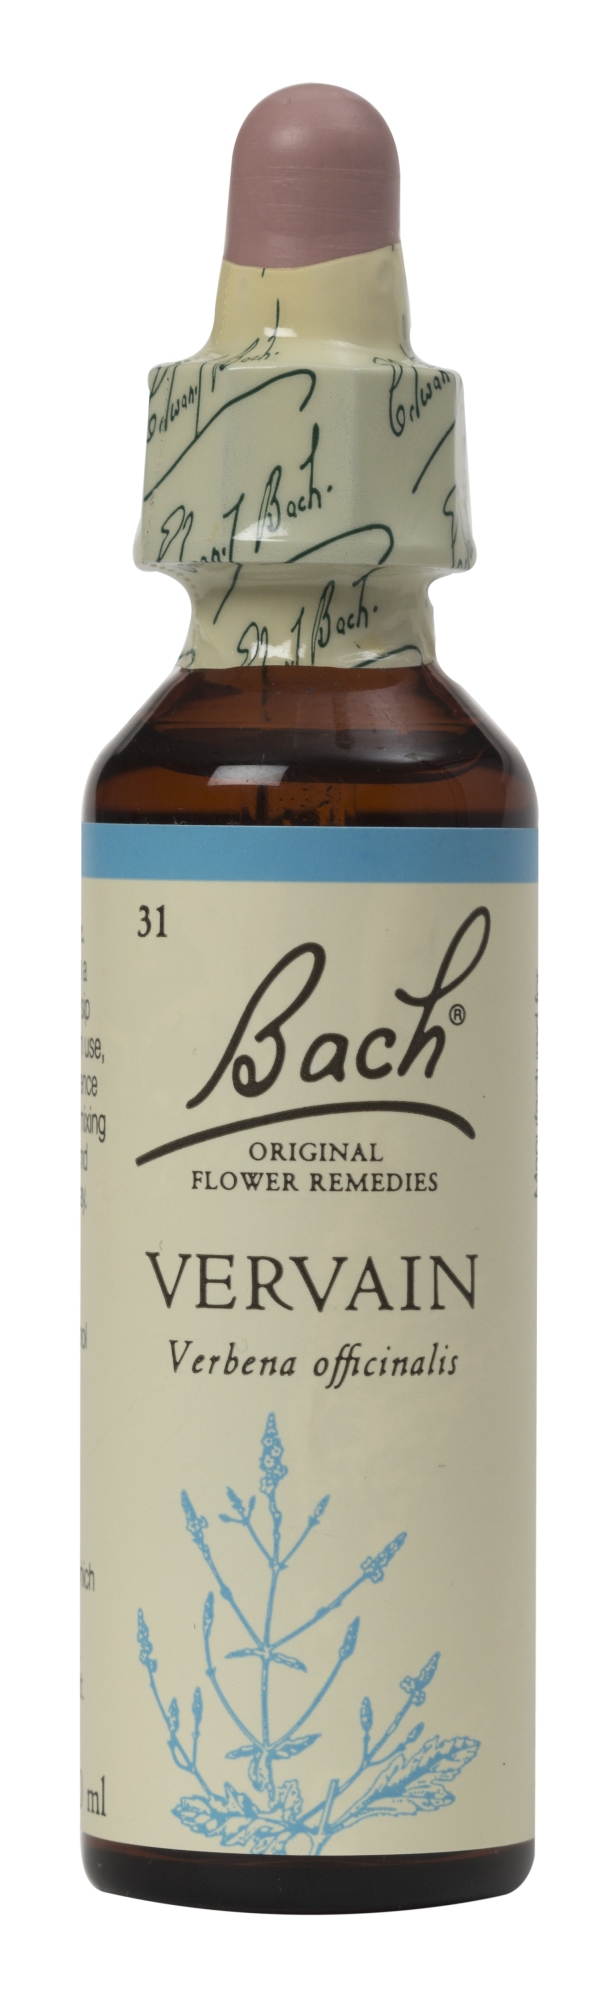 Nelson Bach Flower Remedies: Bach Vervain Flower Remedy (20ml) available online here